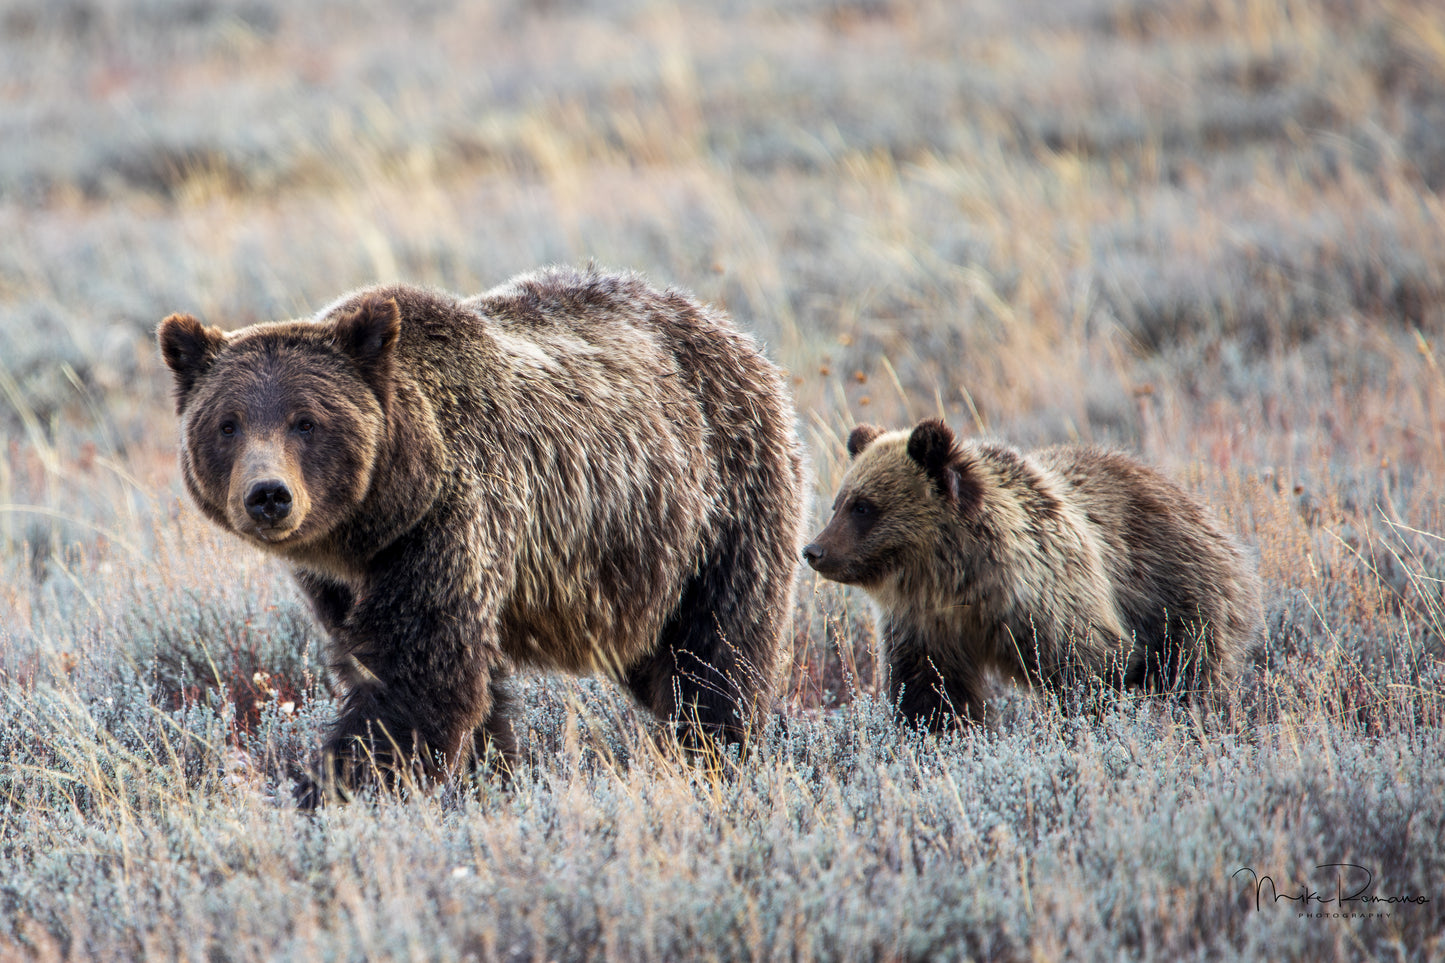 Bear 399 and her 4 Cubs, October 2020